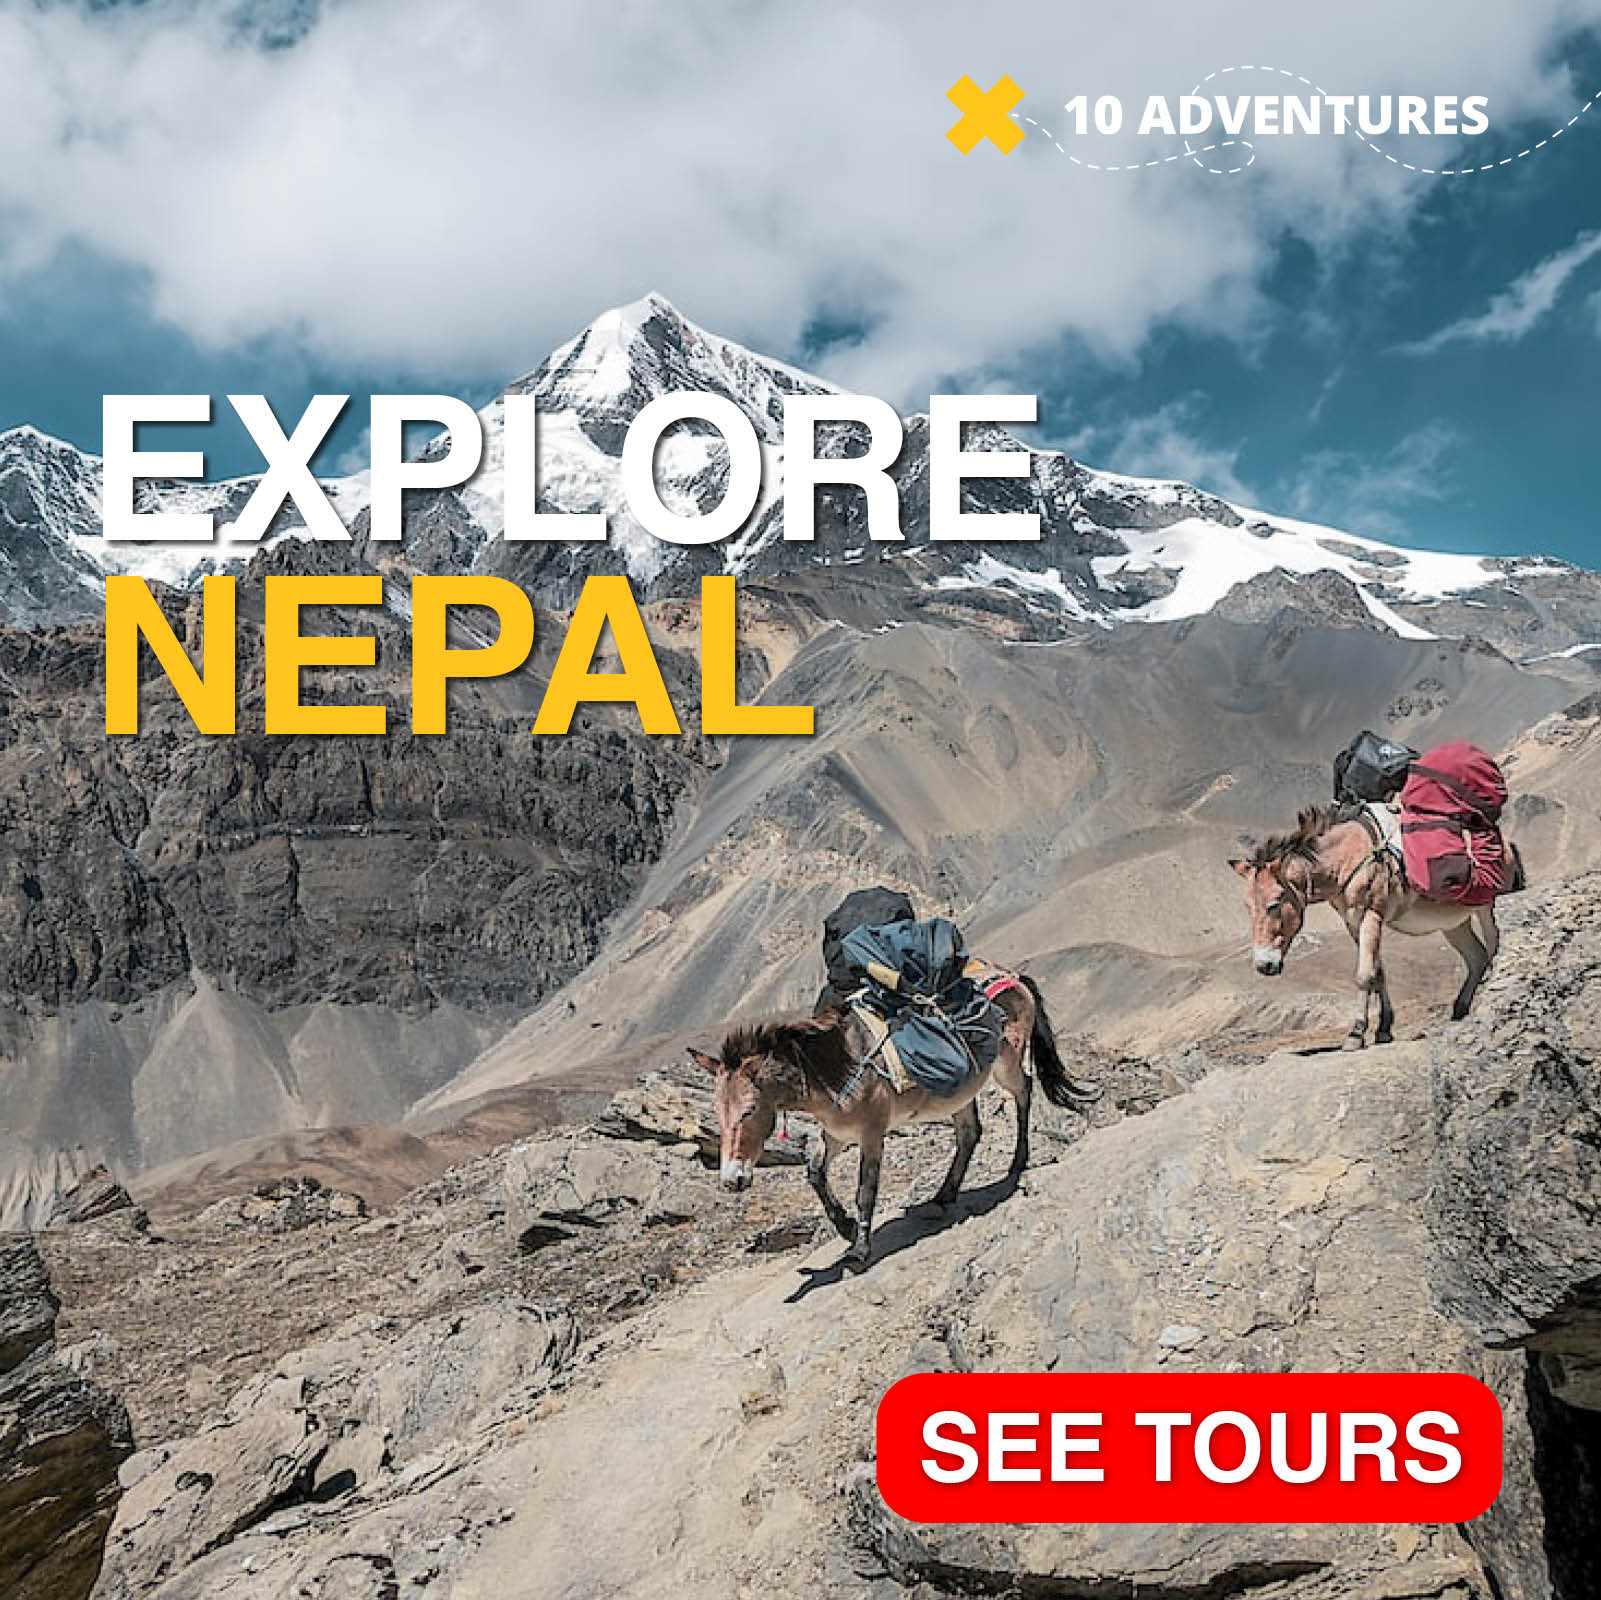 Check out this list of great adventure tours in Nepal